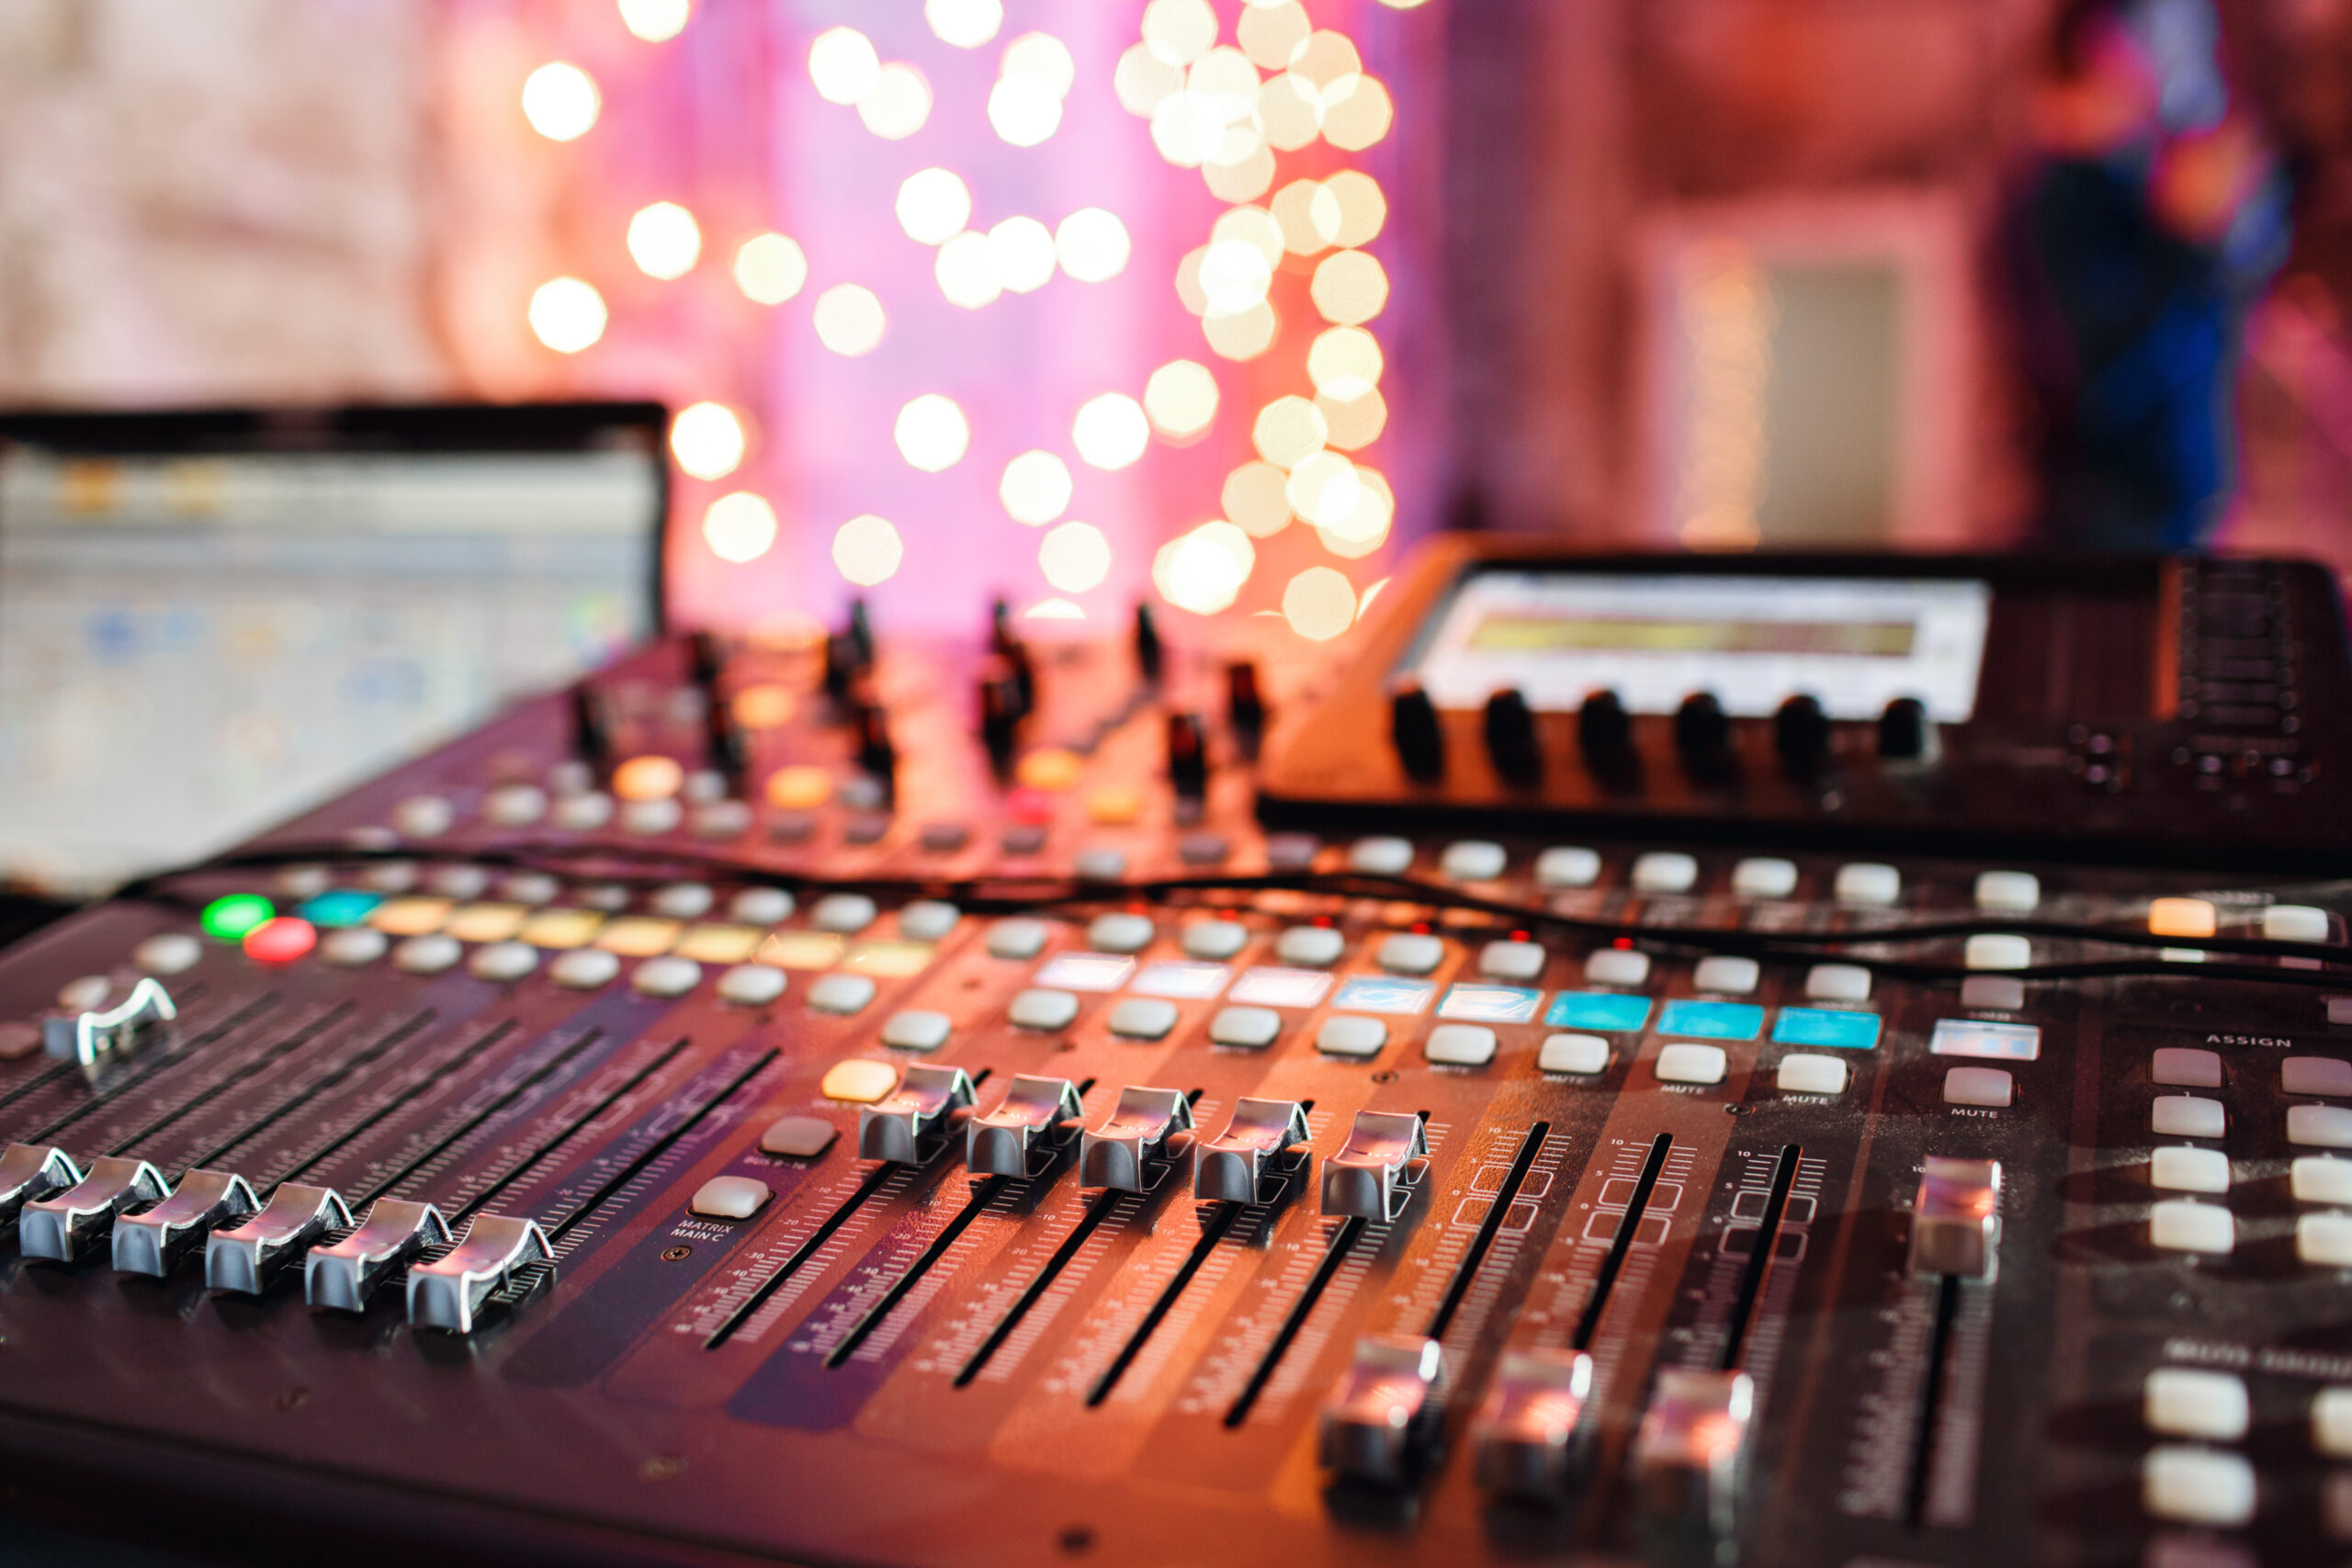 od adjusters and red buttons of a mixing console it is used for audio signals modifications to achieve the desired output applied in recording studios, broadcasting, television